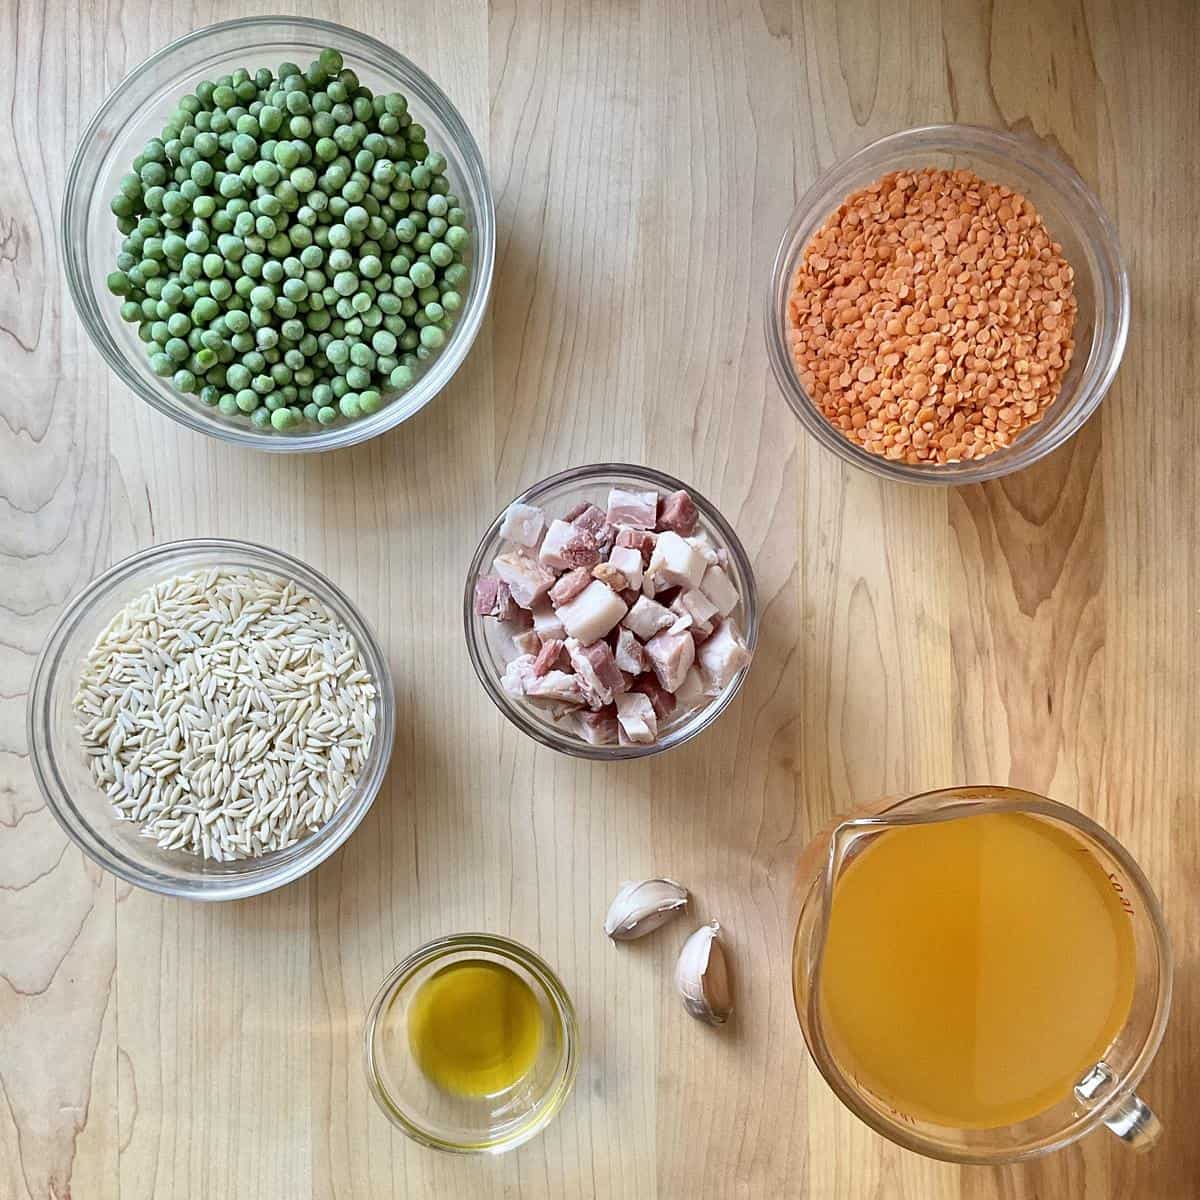 The individual ingredients to make orzo risotto in bowls.